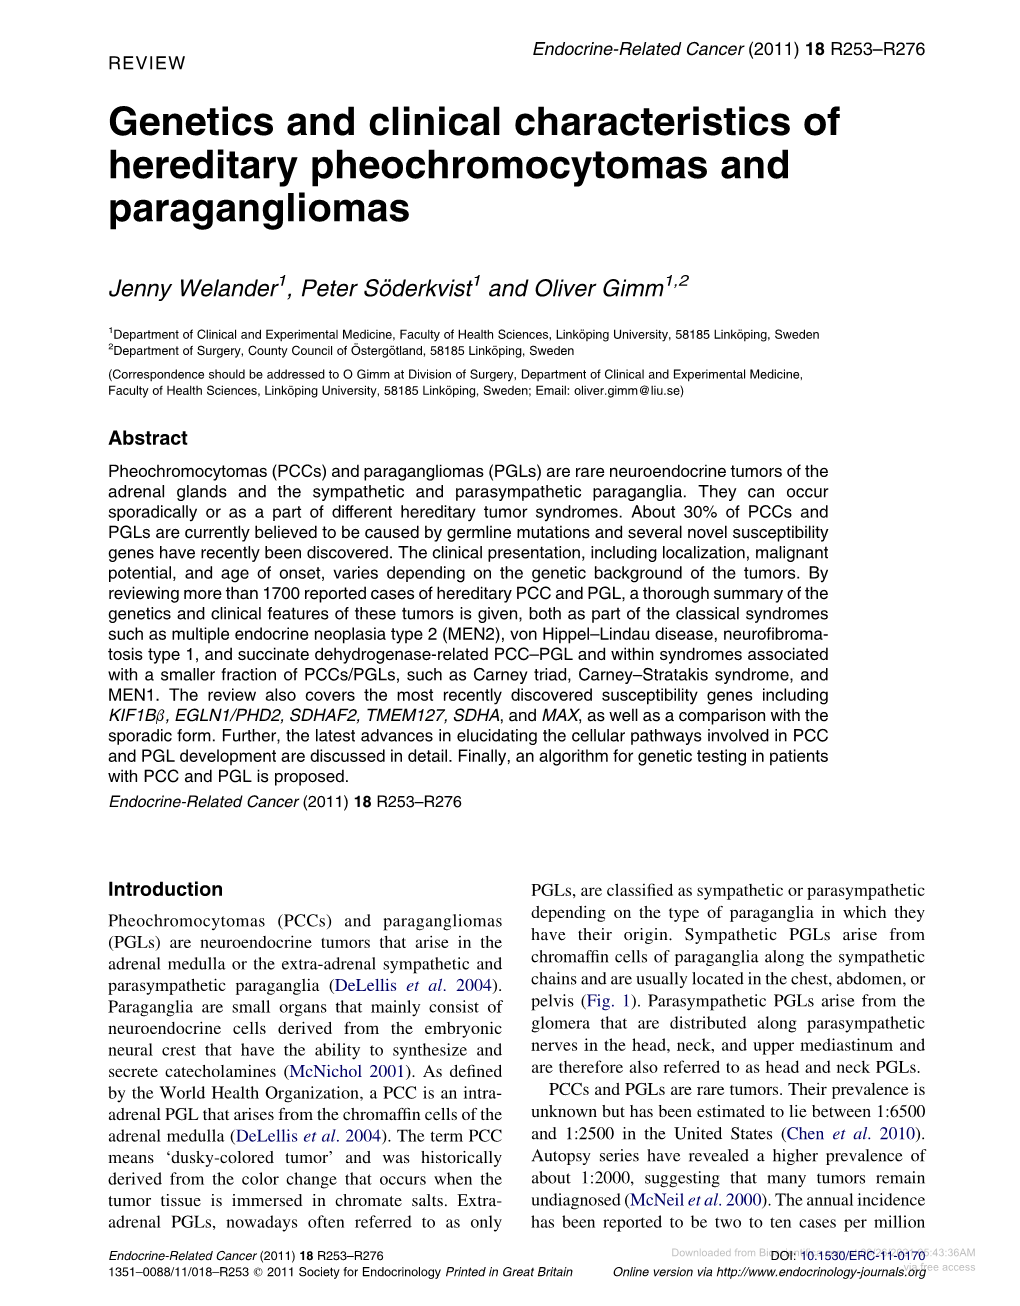 Genetics and Clinical Characteristics of Hereditary Pheochromocytomas and Paragangliomas